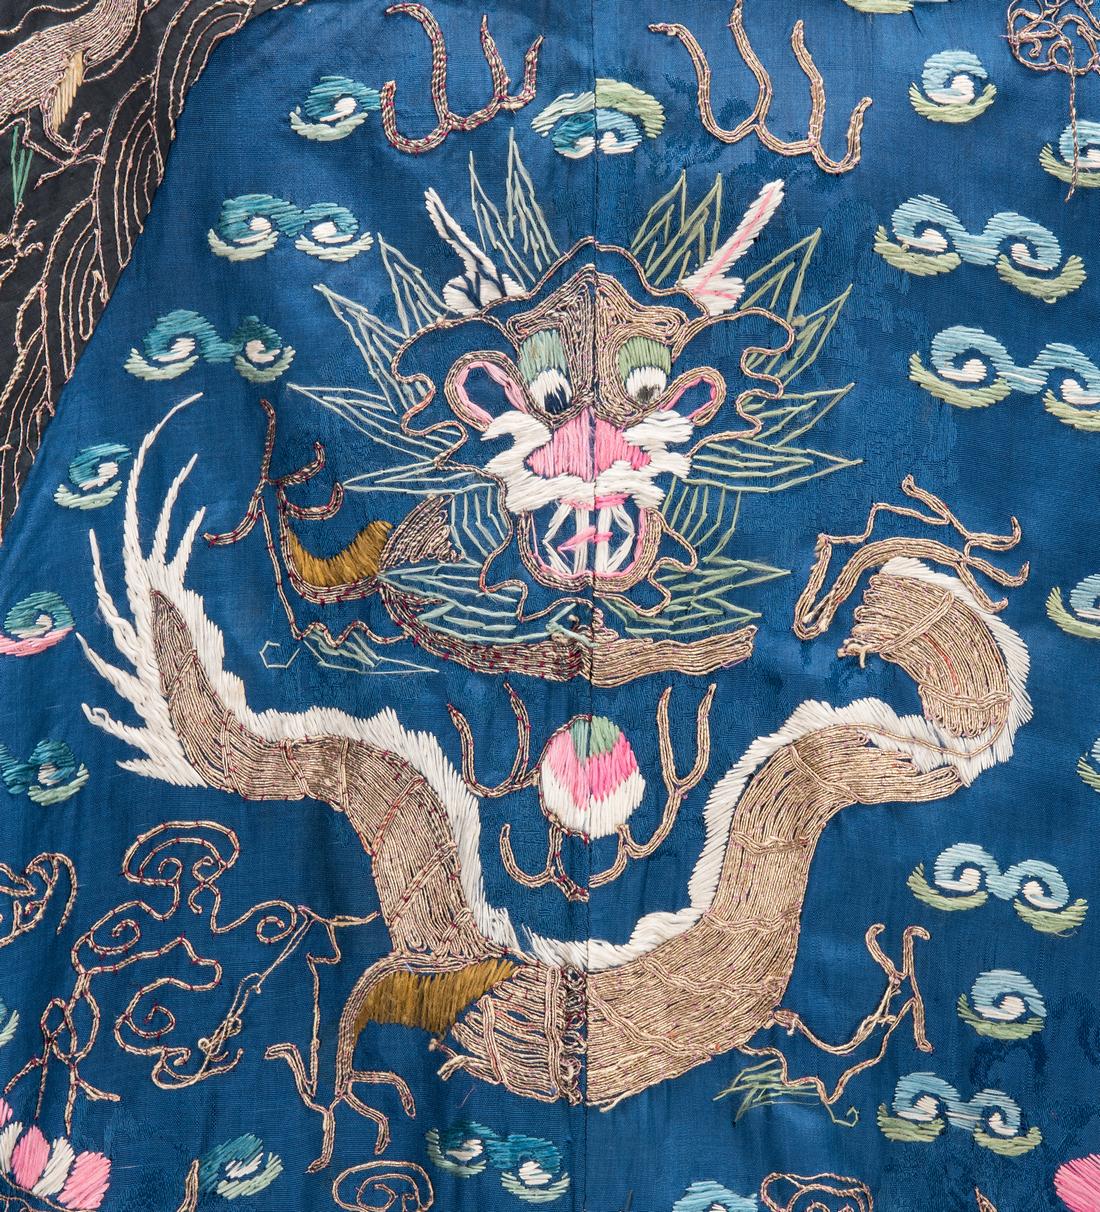 Chinese Theatrical Robe & Qing Tasseled Collar - Image 12 of 18